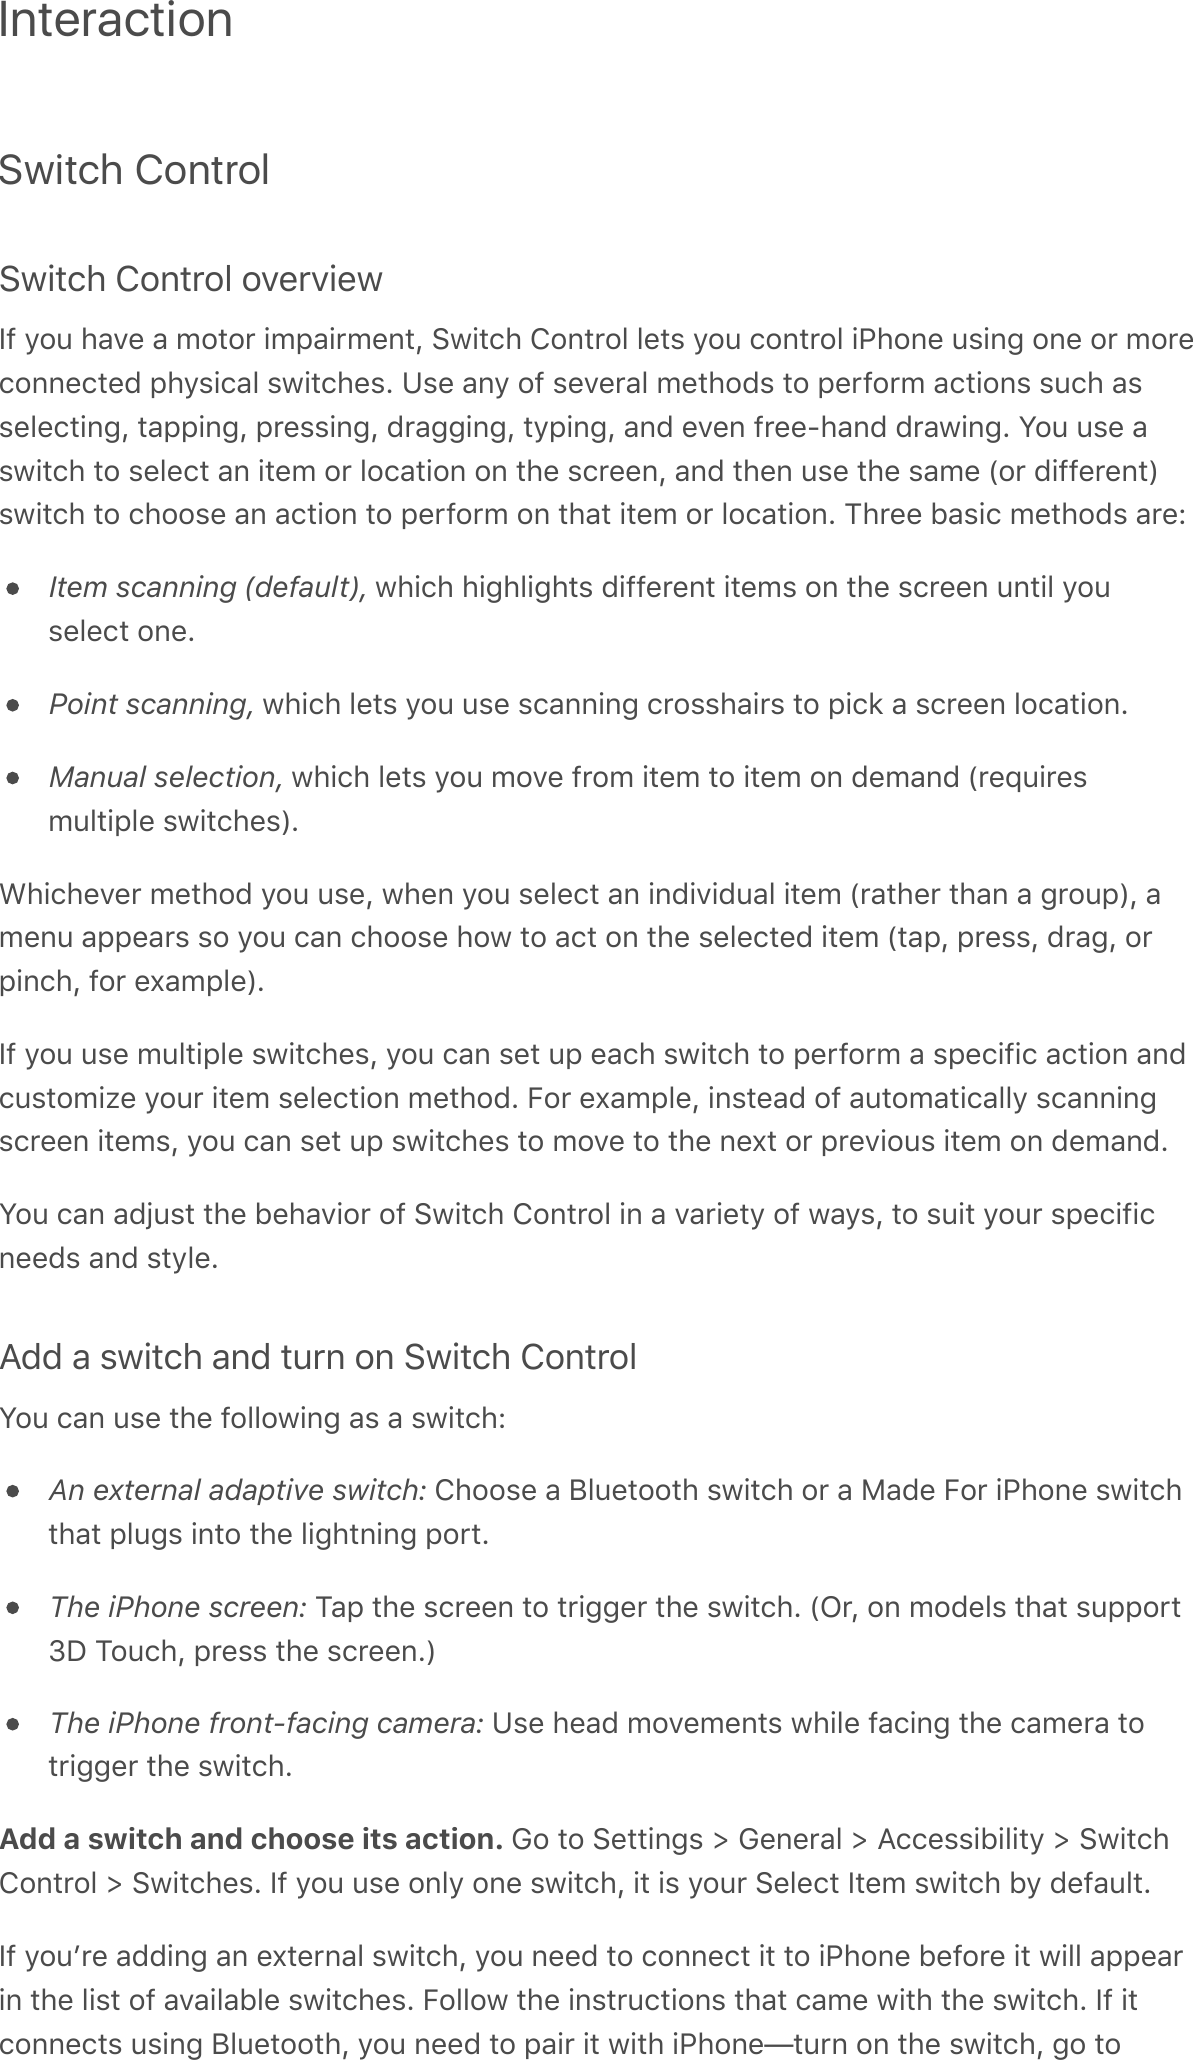 InteractionSwitch ControlEH(%91&amp;O&quot;#%,&quot;?&amp;&quot;:.,:(.HQ8&amp;/&quot;0&amp;1-:.&amp;-&amp;&apos;&quot;%&quot;,&amp;(&apos;6-(,&apos;.#%L&amp;EH(%91&amp;O&quot;#%,&quot;?&amp;?.%)&amp;/&quot;0&amp;9&quot;#%,&quot;?&amp;(71&quot;#.&amp;0)(#5&amp;&quot;#.&amp;&quot;,&amp;&apos;&quot;,.9&quot;##.9%.&lt;&amp;61/)(9-?&amp;)H(%91.)A&amp;\).&amp;-#/&amp;&quot;8&amp;).:.,-?&amp;&apos;.%1&quot;&lt;)&amp;%&quot;&amp;6.,8&quot;,&apos;&amp;-9%(&quot;#)&amp;)091&amp;-)).?.9%(#5L&amp;%-66(#5L&amp;6,.))(#5L&amp;&lt;,-55(#5L&amp;%/6(#5L&amp;-#&lt;&amp;.:.#&amp;8,..T1-#&lt;&amp;&lt;,-H(#5A&amp;N&quot;0&amp;0).&amp;-)H(%91&amp;%&quot;&amp;).?.9%&amp;-#&amp;(%.&apos;&amp;&quot;,&amp;?&quot;9-%(&quot;#&amp;&quot;#&amp;%1.&amp;)9,..#L&amp;-#&lt;&amp;%1.#&amp;0).&amp;%1.&amp;)-&apos;.&amp;^&quot;,&amp;&lt;(88.,.#%_)H(%91&amp;%&quot;&amp;91&quot;&quot;).&amp;-#&amp;-9%(&quot;#&amp;%&quot;&amp;6.,8&quot;,&apos;&amp;&quot;#&amp;%1-%&amp;(%.&apos;&amp;&quot;,&amp;?&quot;9-%(&quot;#A&amp;21,..&amp;@-)(9&amp;&apos;.%1&quot;&lt;)&amp;-,.MItem scanning (default),&amp;H1(91&amp;1(51?(51%)&amp;&lt;(88.,.#%&amp;(%.&apos;)&amp;&quot;#&amp;%1.&amp;)9,..#&amp;0#%(?&amp;/&quot;0).?.9%&amp;&quot;#.APoint scanning,&amp;H1(91&amp;?.%)&amp;/&quot;0&amp;0).&amp;)9-##(#5&amp;9,&quot;))1-(,)&amp;%&quot;&amp;6(93&amp;-&amp;)9,..#&amp;?&quot;9-%(&quot;#AManual selection,&amp;H1(91&amp;?.%)&amp;/&quot;0&amp;&apos;&quot;:.&amp;8,&quot;&apos;&amp;(%.&apos;&amp;%&quot;&amp;(%.&apos;&amp;&quot;#&amp;&lt;.&apos;-#&lt;&amp;^,.c0(,.)&apos;0?%(6?.&amp;)H(%91.)_AF1(91.:.,&amp;&apos;.%1&quot;&lt;&amp;/&quot;0&amp;0).L&amp;H1.#&amp;/&quot;0&amp;).?.9%&amp;-#&amp;(#&lt;(:(&lt;0-?&amp;(%.&apos;&amp;^,-%1.,&amp;%1-#&amp;-&amp;5,&quot;06_L&amp;-&apos;.#0&amp;-66.-,)&amp;)&quot;&amp;/&quot;0&amp;9-#&amp;91&quot;&quot;).&amp;1&quot;H&amp;%&quot;&amp;-9%&amp;&quot;#&amp;%1.&amp;).?.9%.&lt;&amp;(%.&apos;&amp;^%-6L&amp;6,.))L&amp;&lt;,-5L&amp;&quot;,6(#91L&amp;8&quot;,&amp;.`-&apos;6?._AQ8&amp;/&quot;0&amp;0).&amp;&apos;0?%(6?.&amp;)H(%91.)L&amp;/&quot;0&amp;9-#&amp;).%&amp;06&amp;.-91&amp;)H(%91&amp;%&quot;&amp;6.,8&quot;,&apos;&amp;-&amp;)6.9(8(9&amp;-9%(&quot;#&amp;-#&lt;90)%&quot;&apos;(4.&amp;/&quot;0,&amp;(%.&apos;&amp;).?.9%(&quot;#&amp;&apos;.%1&quot;&lt;A&amp;+&quot;,&amp;.`-&apos;6?.L&amp;(#)%.-&lt;&amp;&quot;8&amp;-0%&quot;&apos;-%(9-??/&amp;)9-##(#5)9,..#&amp;(%.&apos;)L&amp;/&quot;0&amp;9-#&amp;).%&amp;06&amp;)H(%91.)&amp;%&quot;&amp;&apos;&quot;:.&amp;%&quot;&amp;%1.&amp;#.`%&amp;&quot;,&amp;6,.:(&quot;0)&amp;(%.&apos;&amp;&quot;#&amp;&lt;.&apos;-#&lt;AN&quot;0&amp;9-#&amp;-&lt;[0)%&amp;%1.&amp;@.1-:(&quot;,&amp;&quot;8&amp;EH(%91&amp;O&quot;#%,&quot;?&amp;(#&amp;-&amp;:-,(.%/&amp;&quot;8&amp;H-/)L&amp;%&quot;&amp;)0(%&amp;/&quot;0,&amp;)6.9(8(9#..&lt;)&amp;-#&lt;&amp;)%/?.A;&lt;&lt;&amp;-&amp;)H(%91&amp;-#&lt;&amp;%0,#&amp;&quot;#&amp;EH(%91&amp;O&quot;#%,&quot;?N&quot;0&amp;9-#&amp;0).&amp;%1.&amp;8&quot;??&quot;H(#5&amp;-)&amp;-&amp;)H(%91MAn external adaptive switch:&amp;O1&quot;&quot;).&amp;-&amp;K?0.%&quot;&quot;%1&amp;)H(%91&amp;&quot;,&amp;-&amp;B-&lt;.&amp;+&quot;,&amp;(71&quot;#.&amp;)H(%91%1-%&amp;6?05)&amp;(#%&quot;&amp;%1.&amp;?(51%#(#5&amp;6&quot;,%AThe iPhone screen:&amp;2-6&amp;%1.&amp;)9,..#&amp;%&quot;&amp;%,(55.,&amp;%1.&amp;)H(%91A&amp;^I,L&amp;&quot;#&amp;&apos;&quot;&lt;.?)&amp;%1-%&amp;)066&quot;,%]!&amp;2&quot;091L&amp;6,.))&amp;%1.&amp;)9,..#A_The iPhone front-facing camera:&amp;\).&amp;1.-&lt;&amp;&apos;&quot;:.&apos;.#%)&amp;H1(?.&amp;8-9(#5&amp;%1.&amp;9-&apos;.,-&amp;%&quot;%,(55.,&amp;%1.&amp;)H(%91AAdd a switch and choose its action. G&quot;&amp;%&quot;&amp;E.%%(#5)&amp;d&amp;G.#.,-?&amp;d&amp;;99.))(@(?(%/&amp;d&amp;EH(%91O&quot;#%,&quot;?&amp;d&amp;EH(%91.)A&amp;Q8&amp;/&quot;0&amp;0).&amp;&quot;#?/&amp;&quot;#.&amp;)H(%91L&amp;(%&amp;()&amp;/&quot;0,&amp;E.?.9%&amp;Q%.&apos;&amp;)H(%91&amp;@/&amp;&lt;.8-0?%AQ8&amp;/&quot;0$,.&amp;-&lt;&lt;(#5&amp;-#&amp;.`%.,#-?&amp;)H(%91L&amp;/&quot;0&amp;#..&lt;&amp;%&quot;&amp;9&quot;##.9%&amp;(%&amp;%&quot;&amp;(71&quot;#.&amp;@.8&quot;,.&amp;(%&amp;H(??&amp;-66.-,(#&amp;%1.&amp;?()%&amp;&quot;8&amp;-:-(?-@?.&amp;)H(%91.)A&amp;+&quot;??&quot;H&amp;%1.&amp;(#)%,09%(&quot;#)&amp;%1-%&amp;9-&apos;.&amp;H(%1&amp;%1.&amp;)H(%91A&amp;Q8&amp;(%9&quot;##.9%)&amp;0)(#5&amp;K?0.%&quot;&quot;%1L&amp;/&quot;0&amp;#..&lt;&amp;%&quot;&amp;6-(,&amp;(%&amp;H(%1&amp;(71&quot;#.e%0,#&amp;&quot;#&amp;%1.&amp;)H(%91L&amp;5&quot;&amp;%&quot;